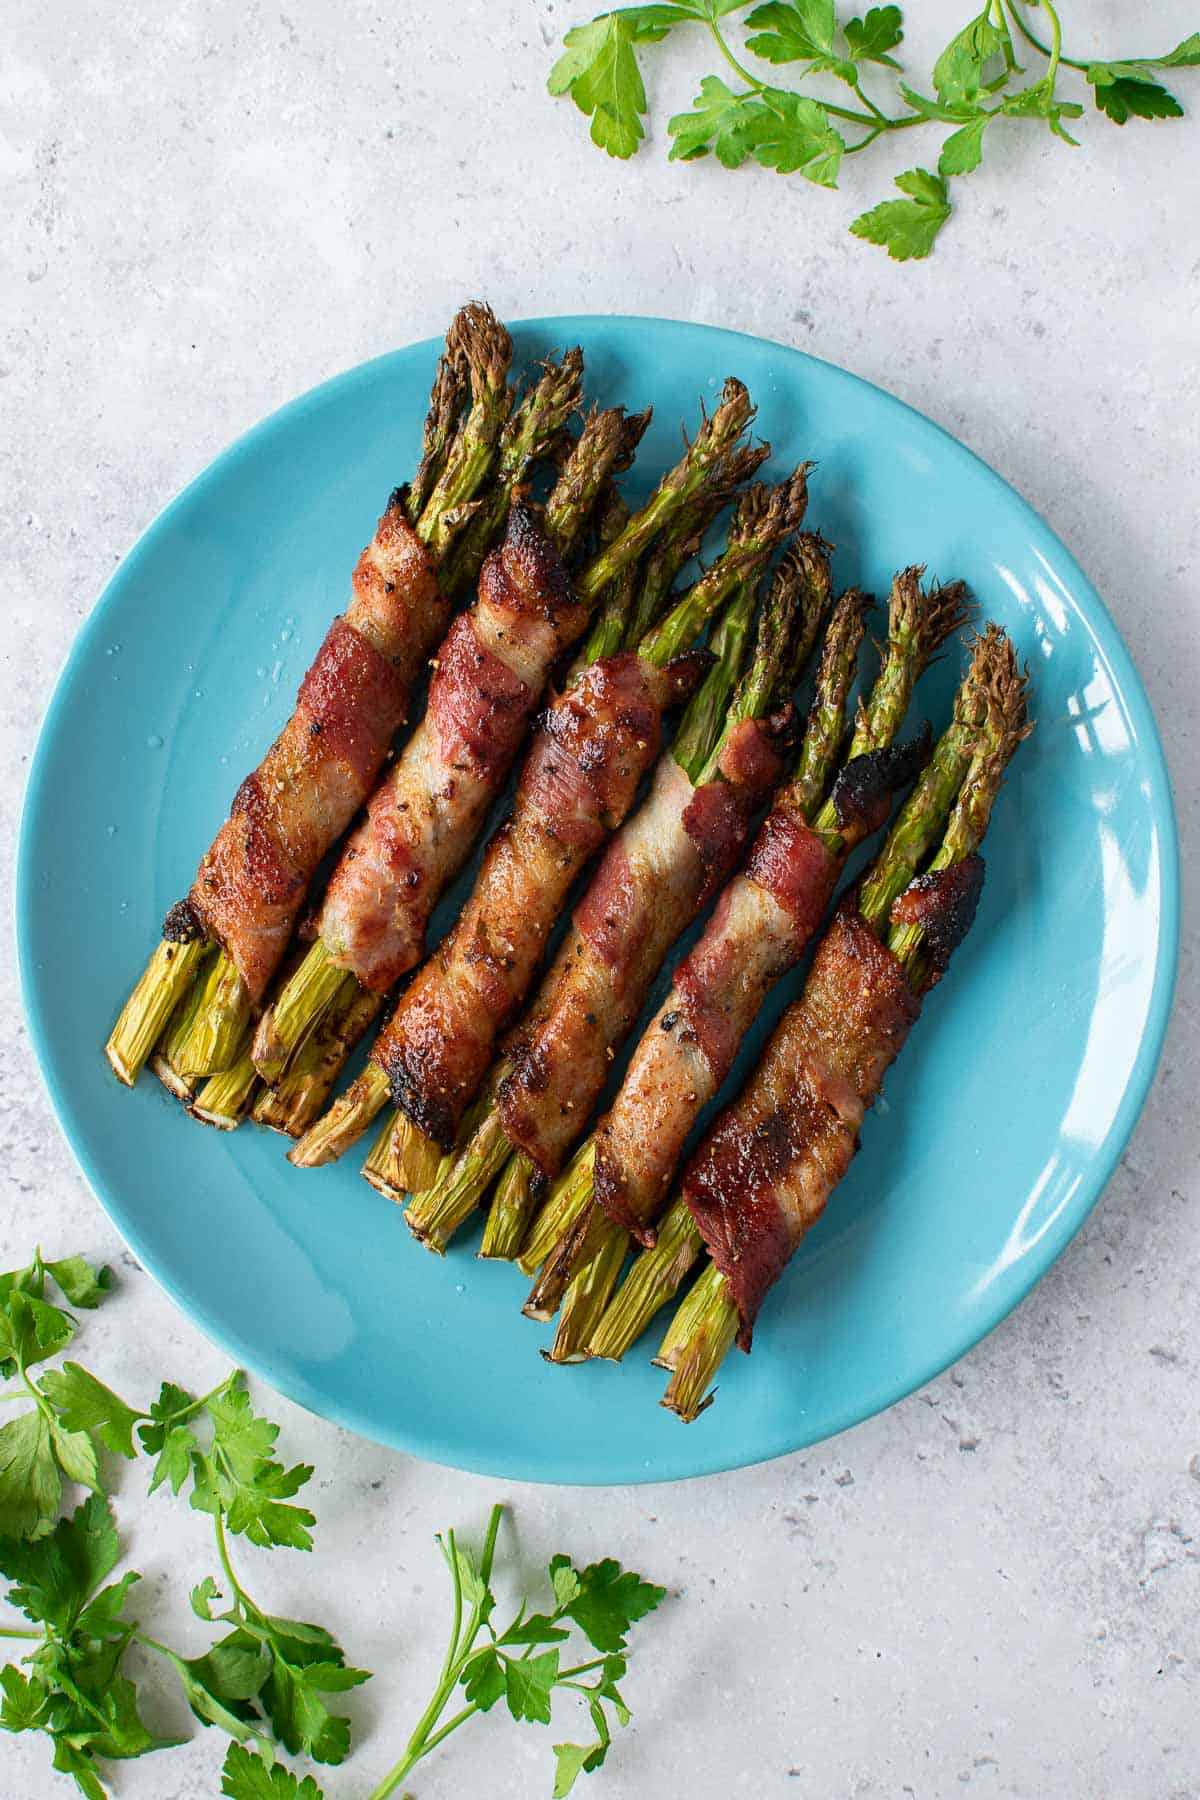 Bundles of asparagus wrapped in bacon, marinated with maple syrup and seasoning.